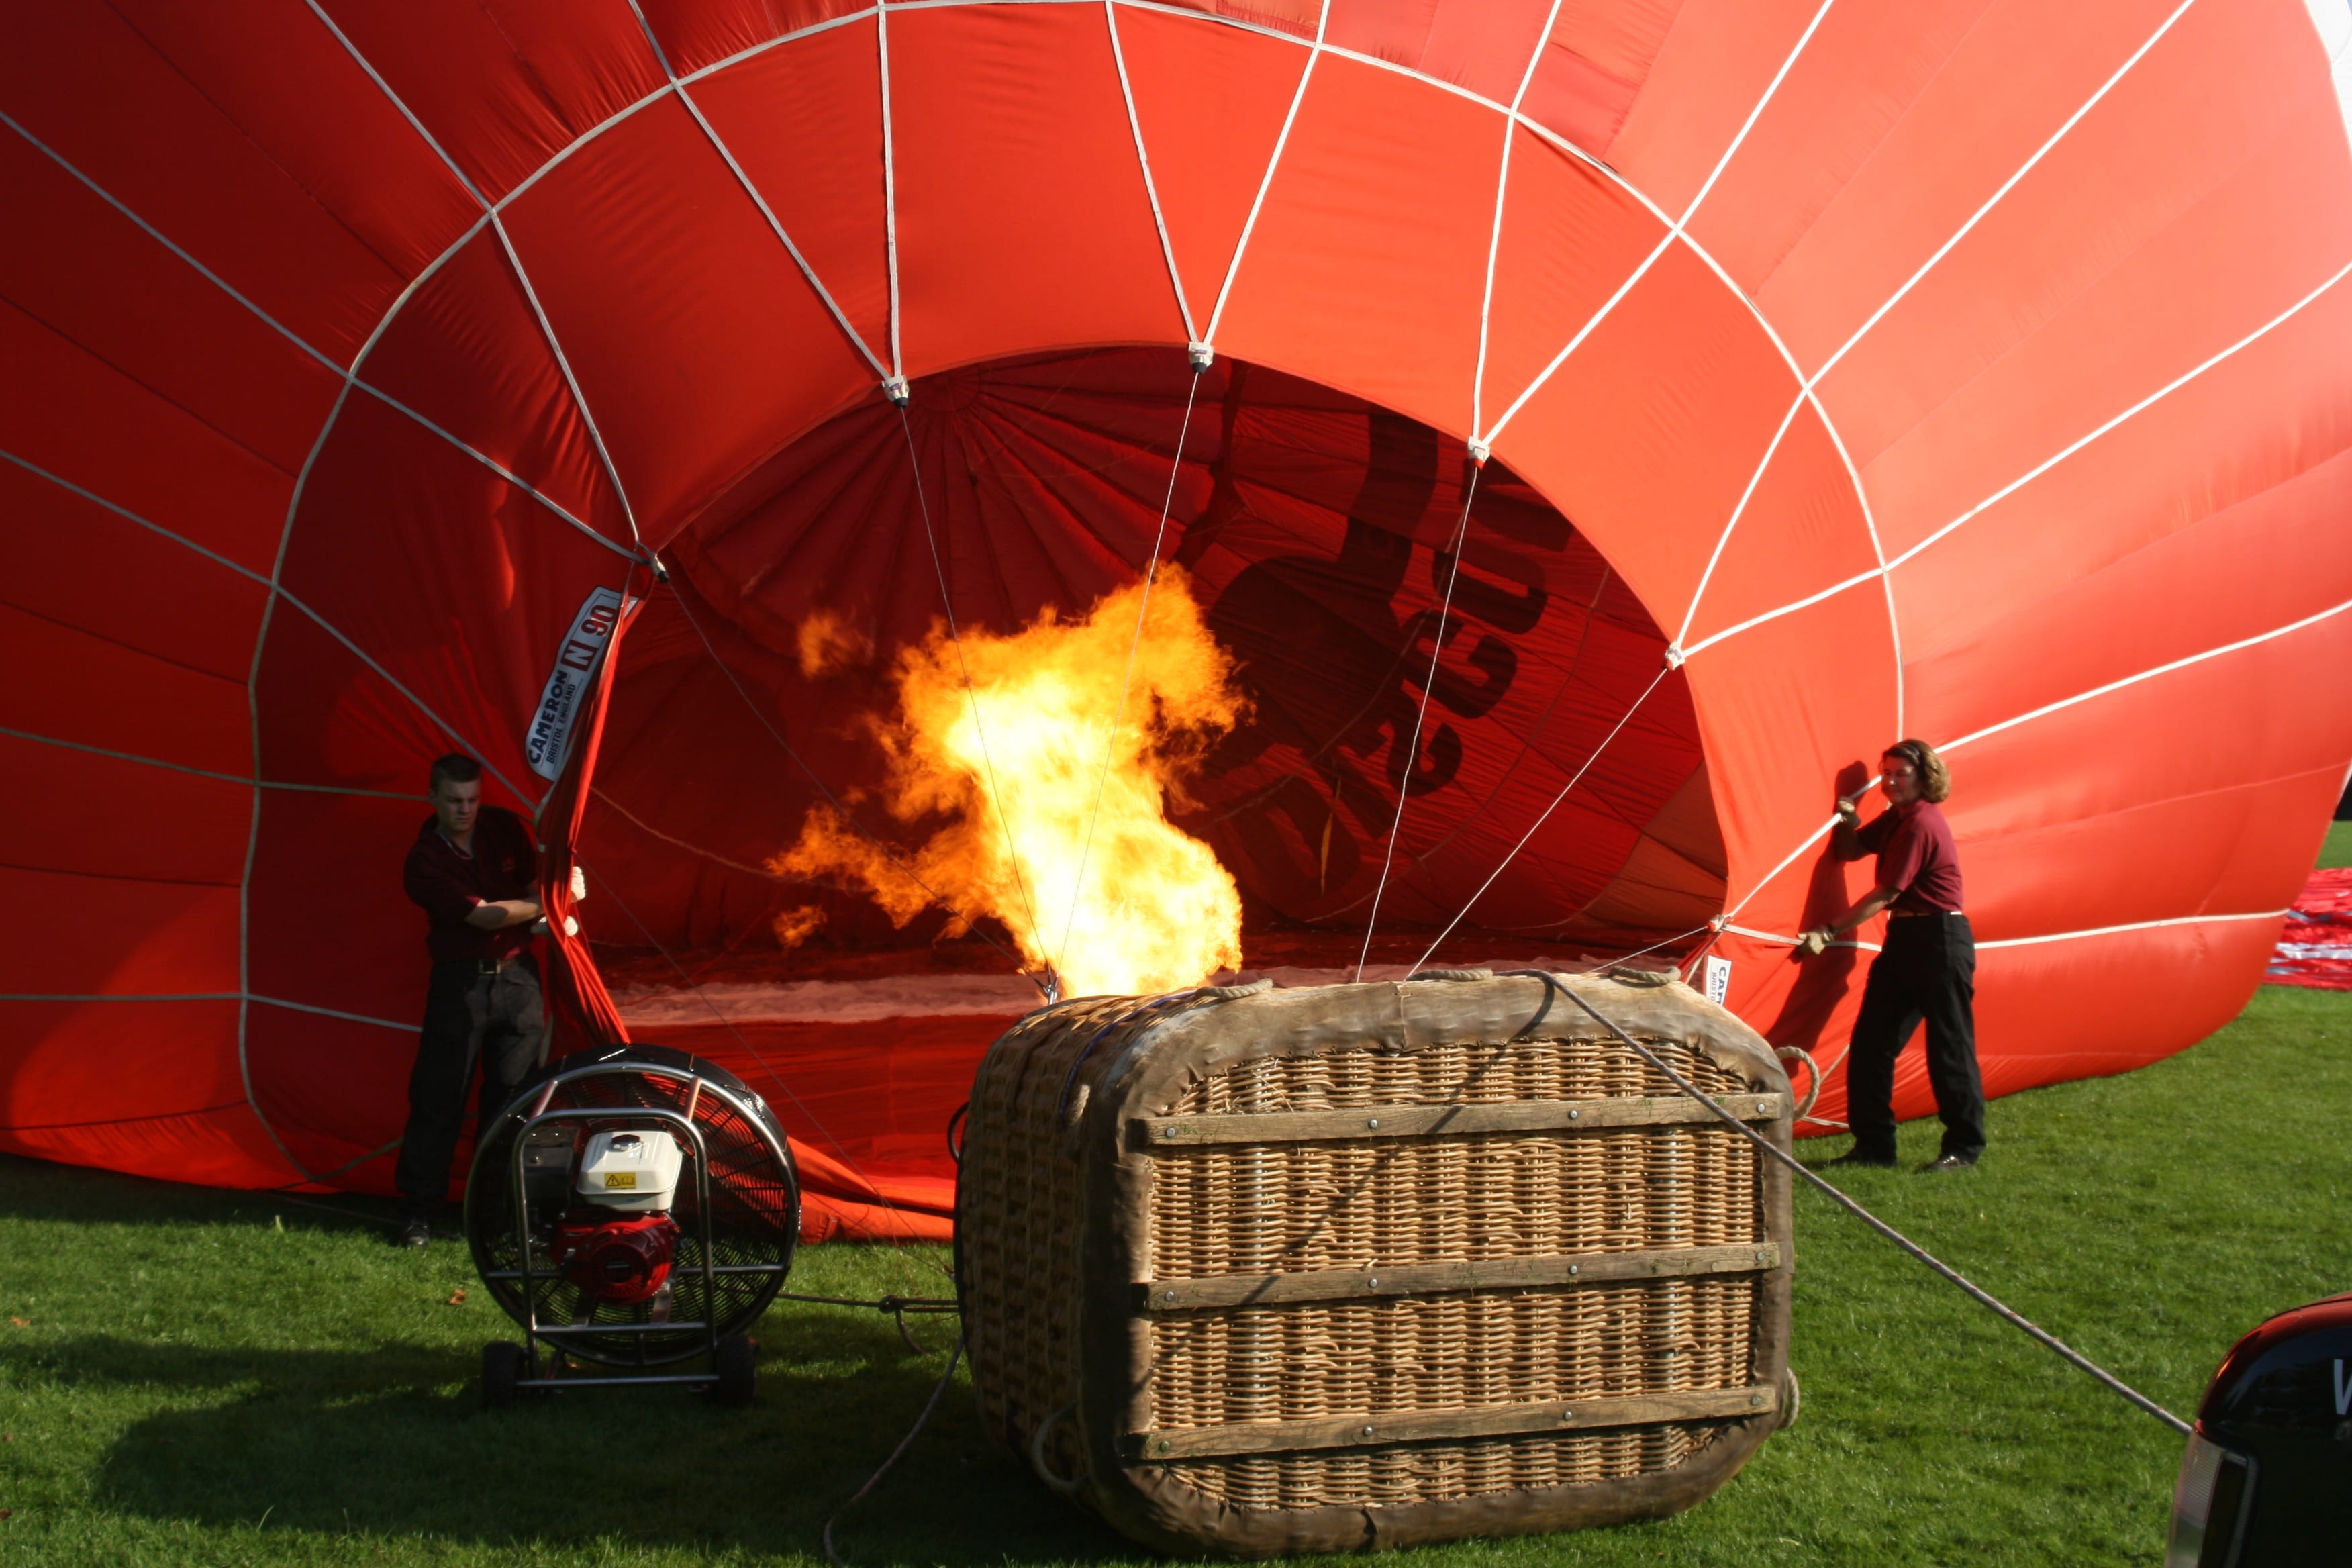 Inflating The Balloon